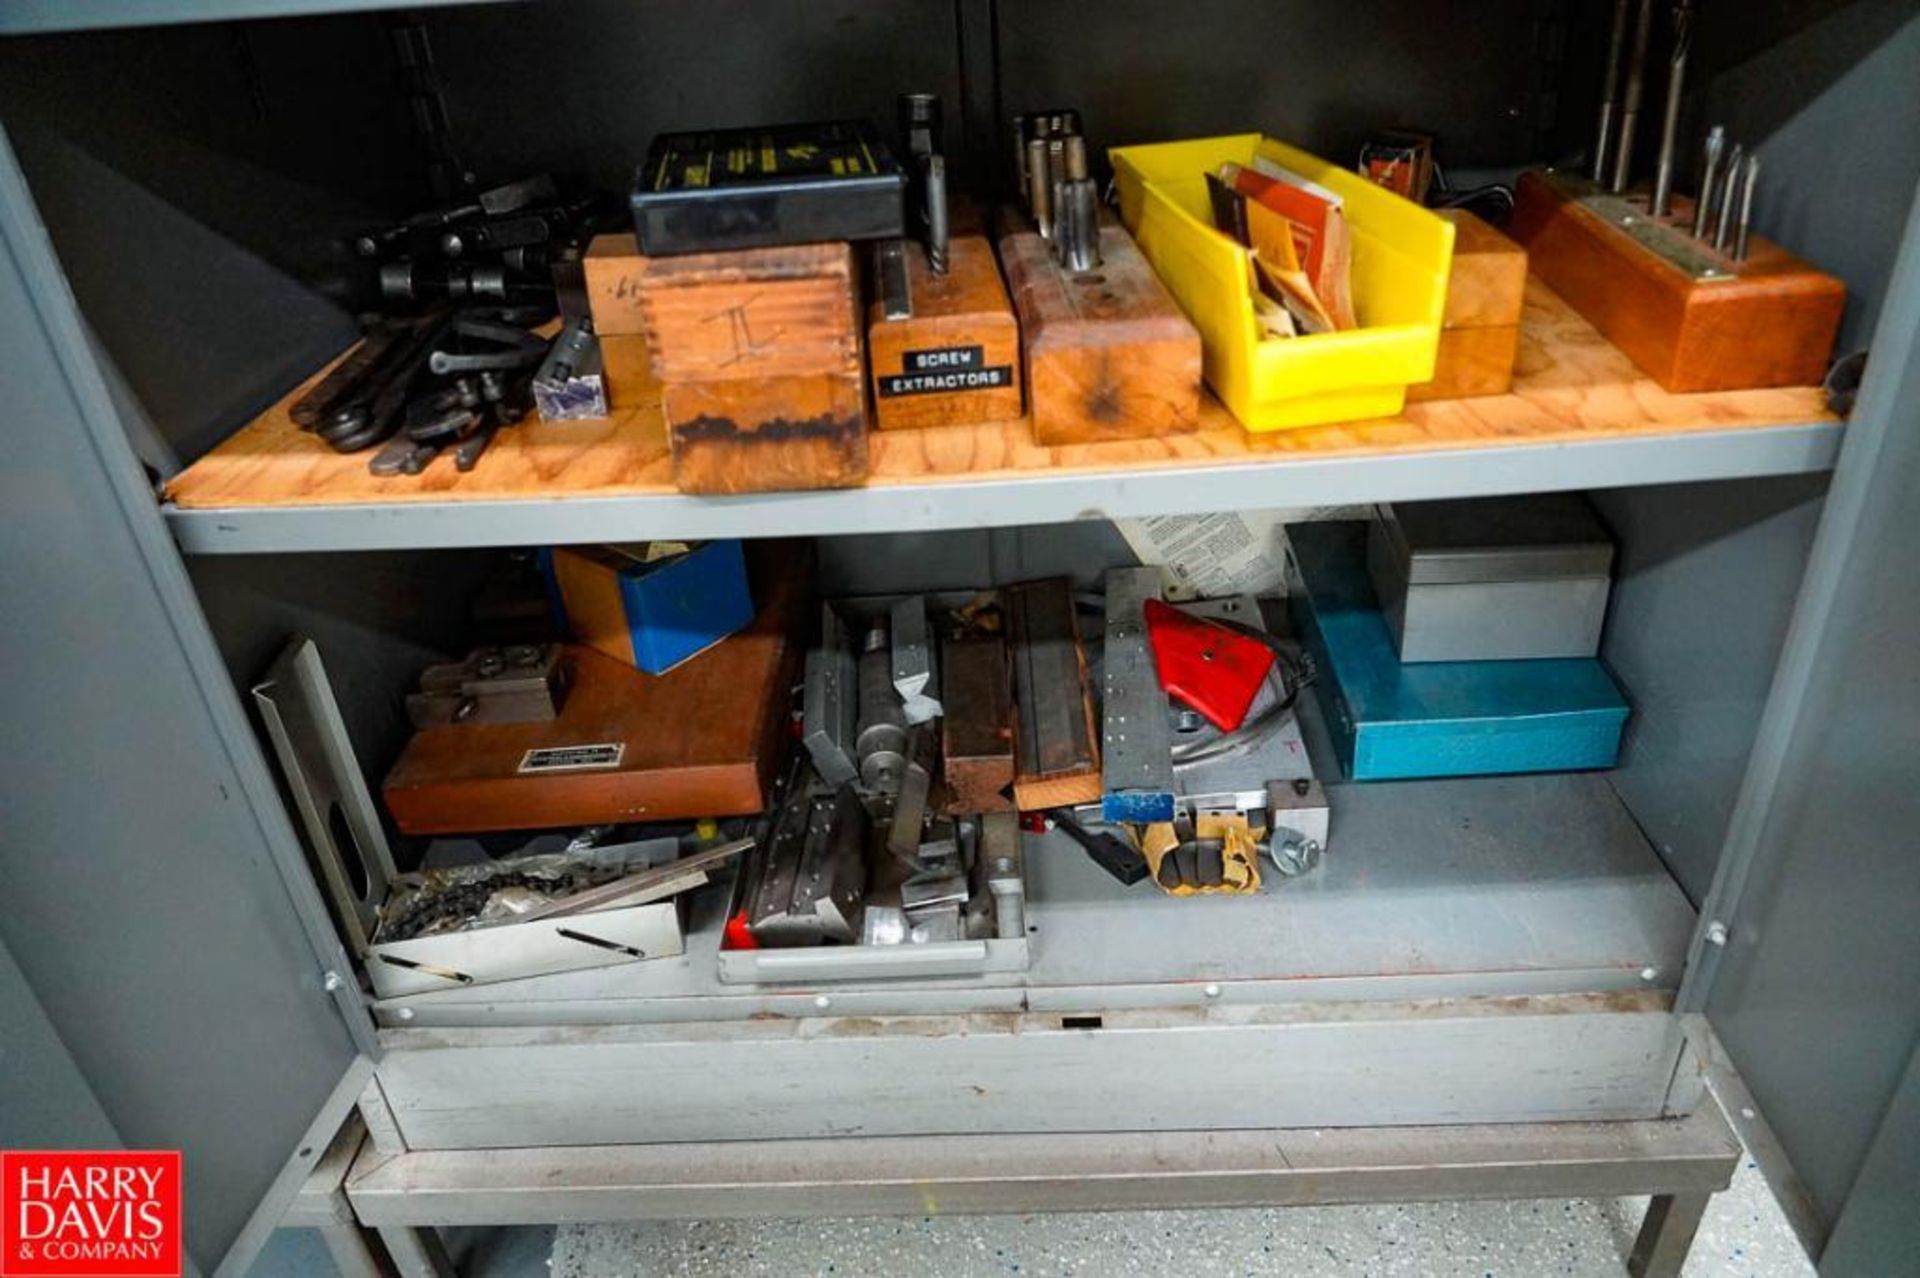 Contents of Tool Storage Crib 1 (3) 2 Door Metal Cabinet Filled with Lathe Tooling Bars, Collets, Dr - Image 24 of 24